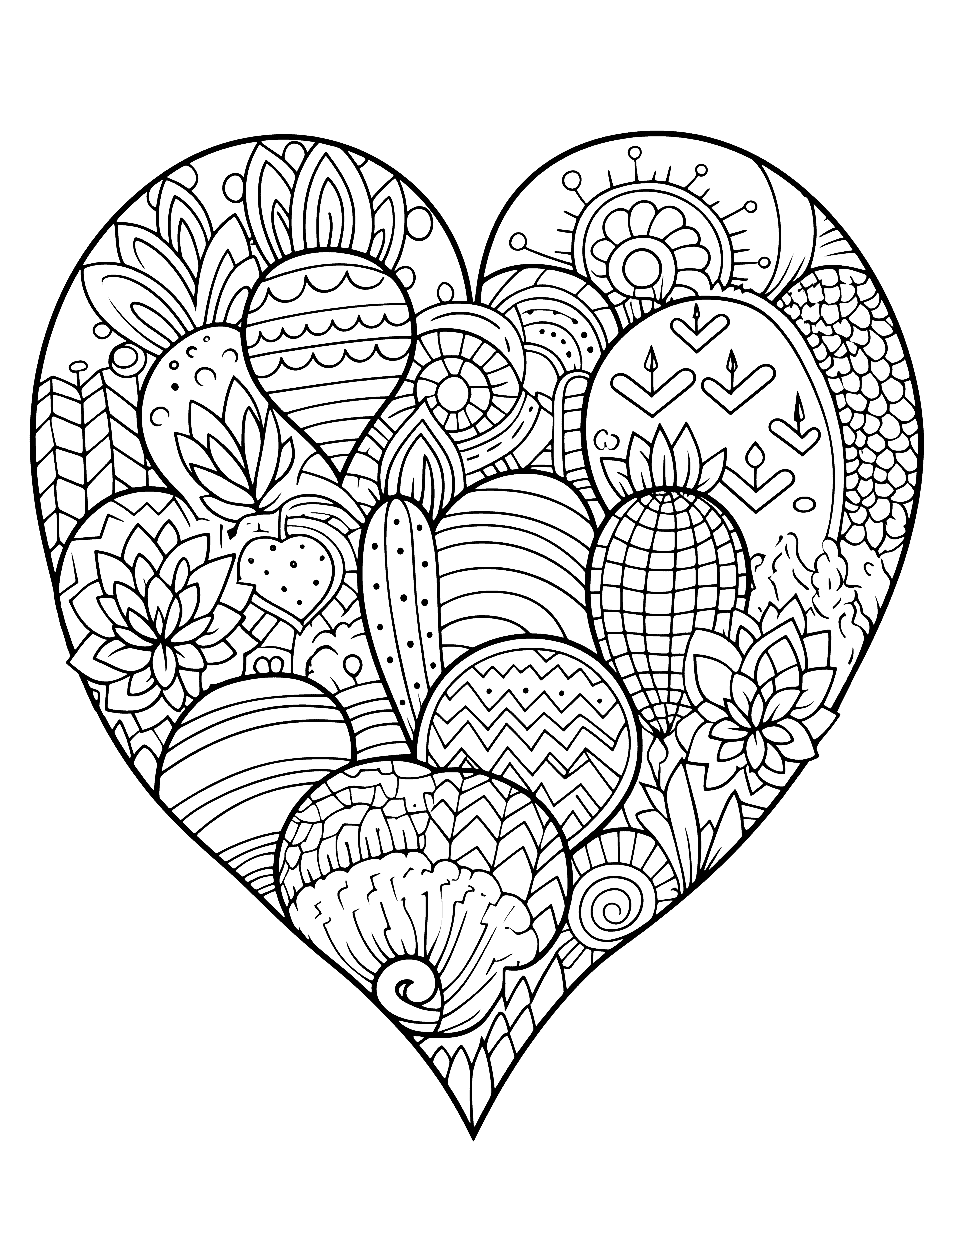 Cactus Hearts Heart Coloring Page - Cacti with heart-shaped flowers.